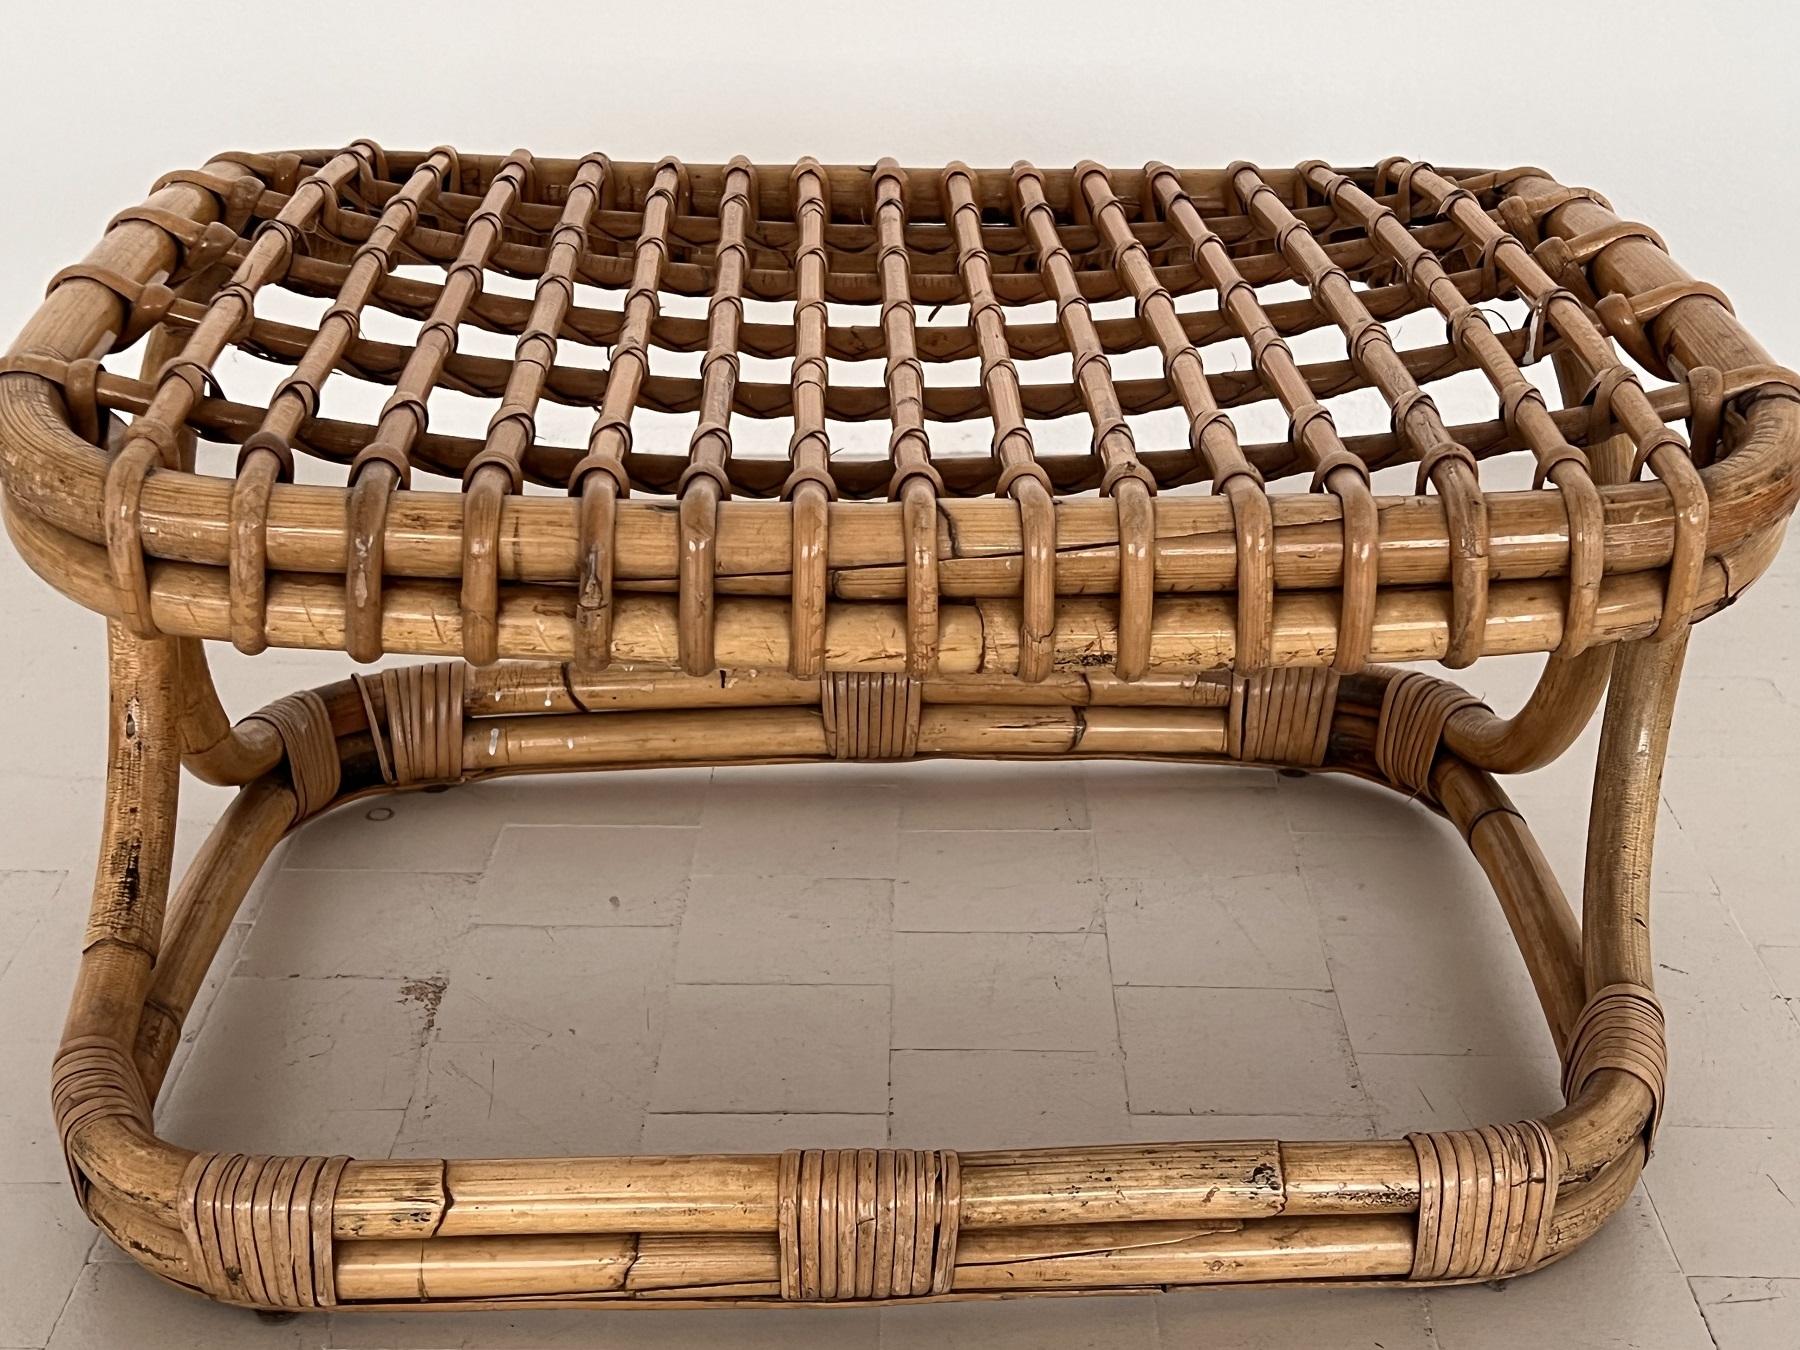 Italian Midcentury Stool in Bamboo Rattan by Tito Agnoli, 1960s For Sale 3